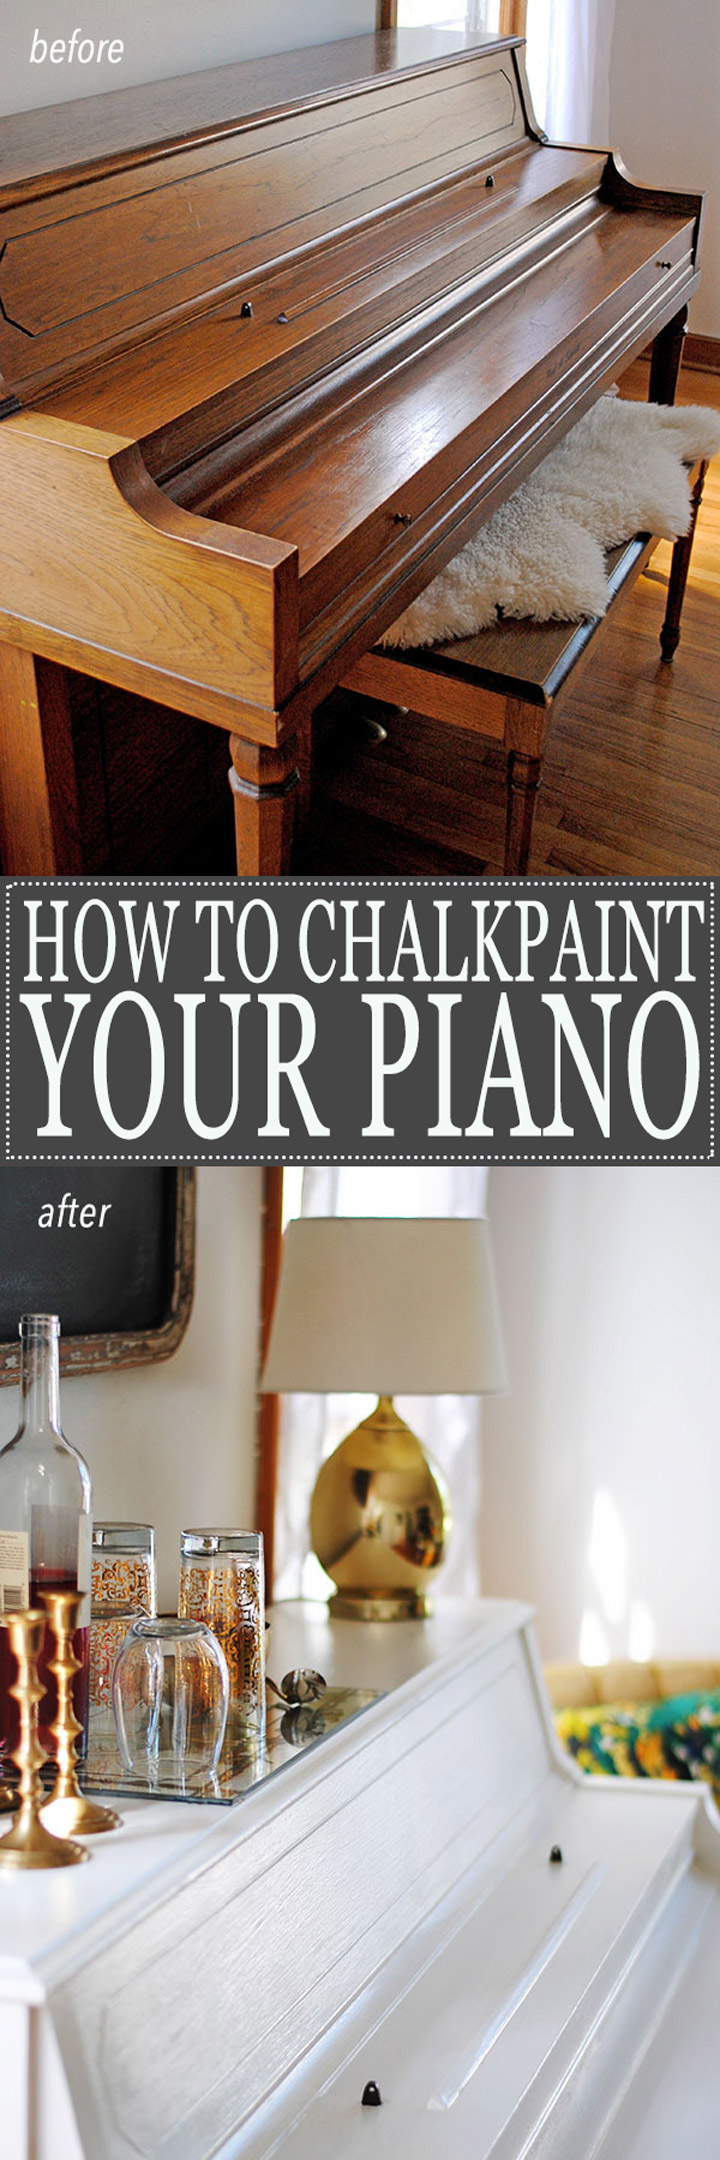 how to paint your piano white!